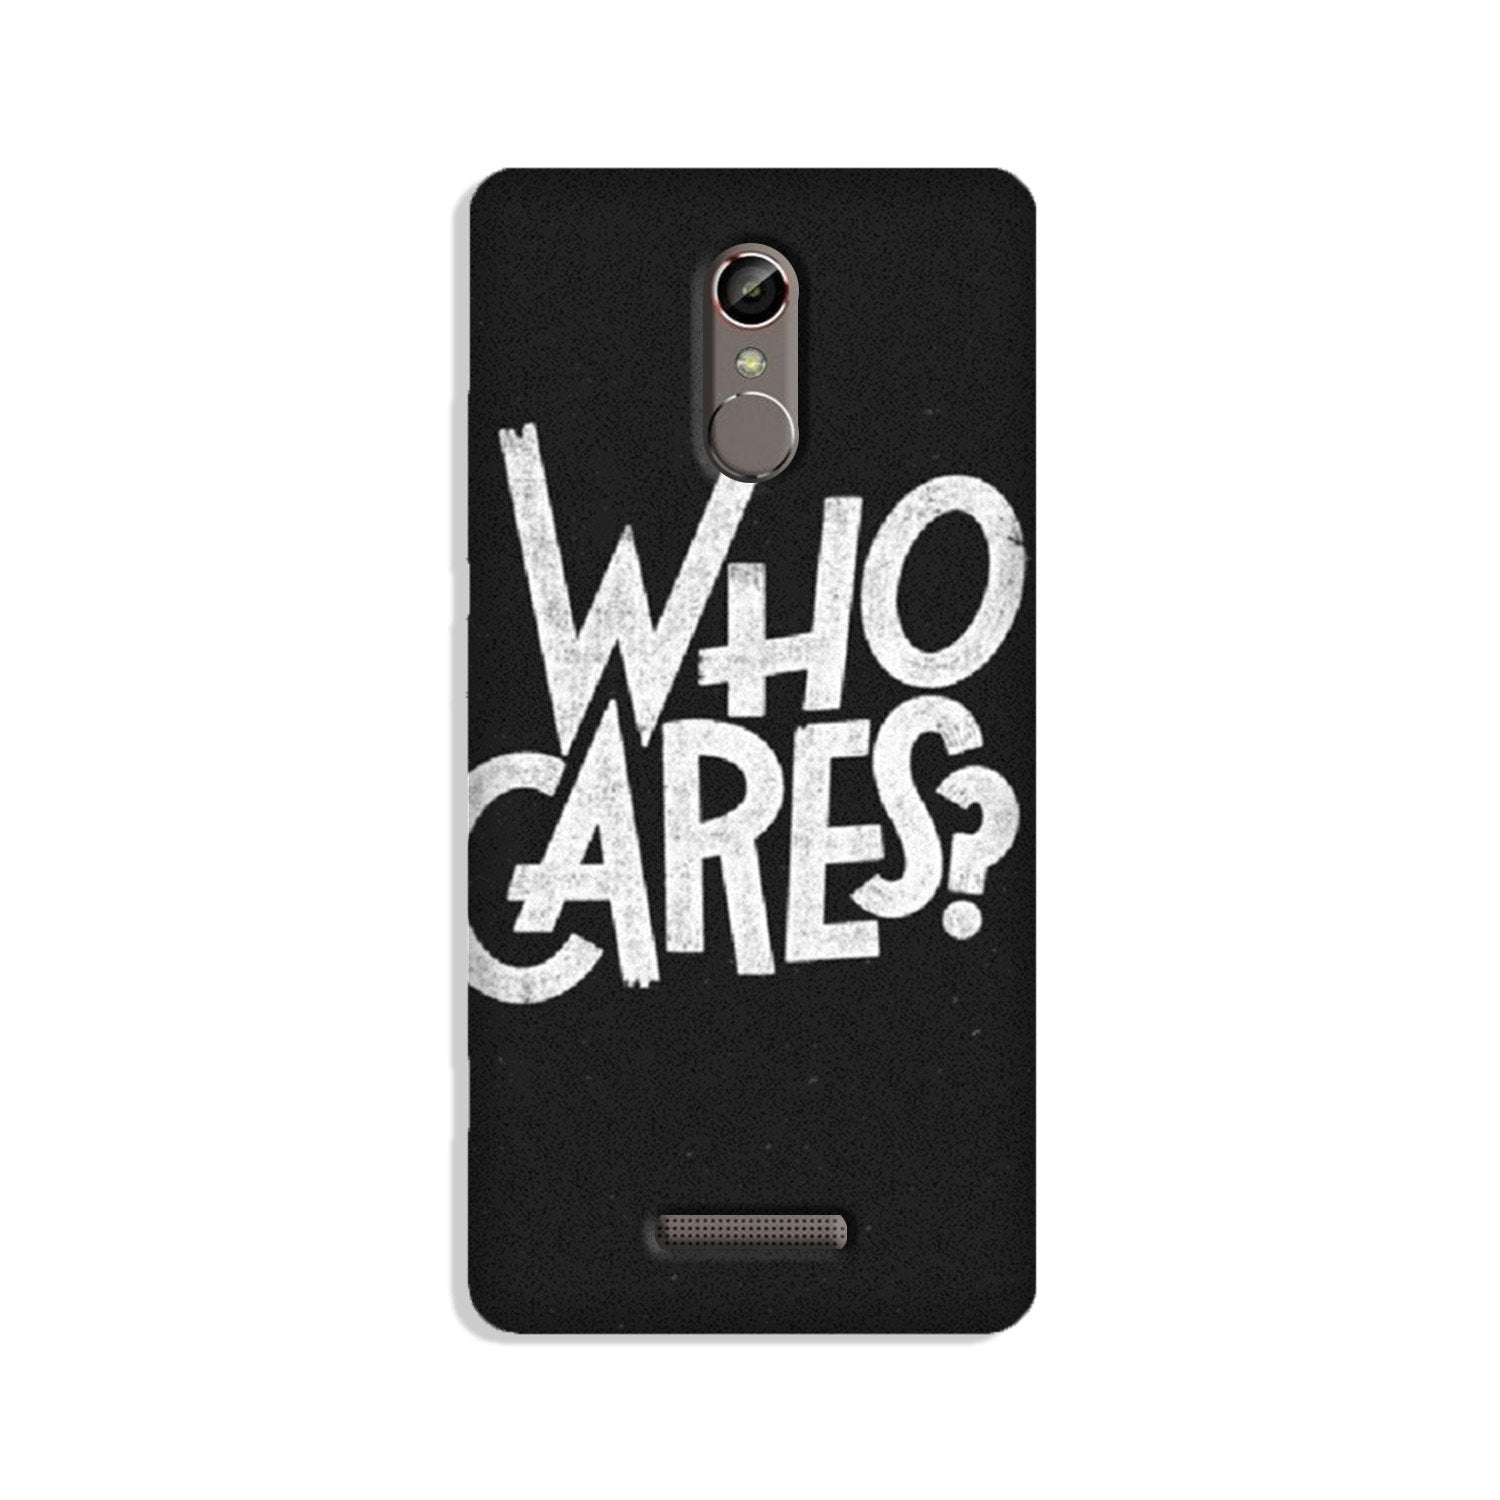 Who Cares Case for Gionee S6s